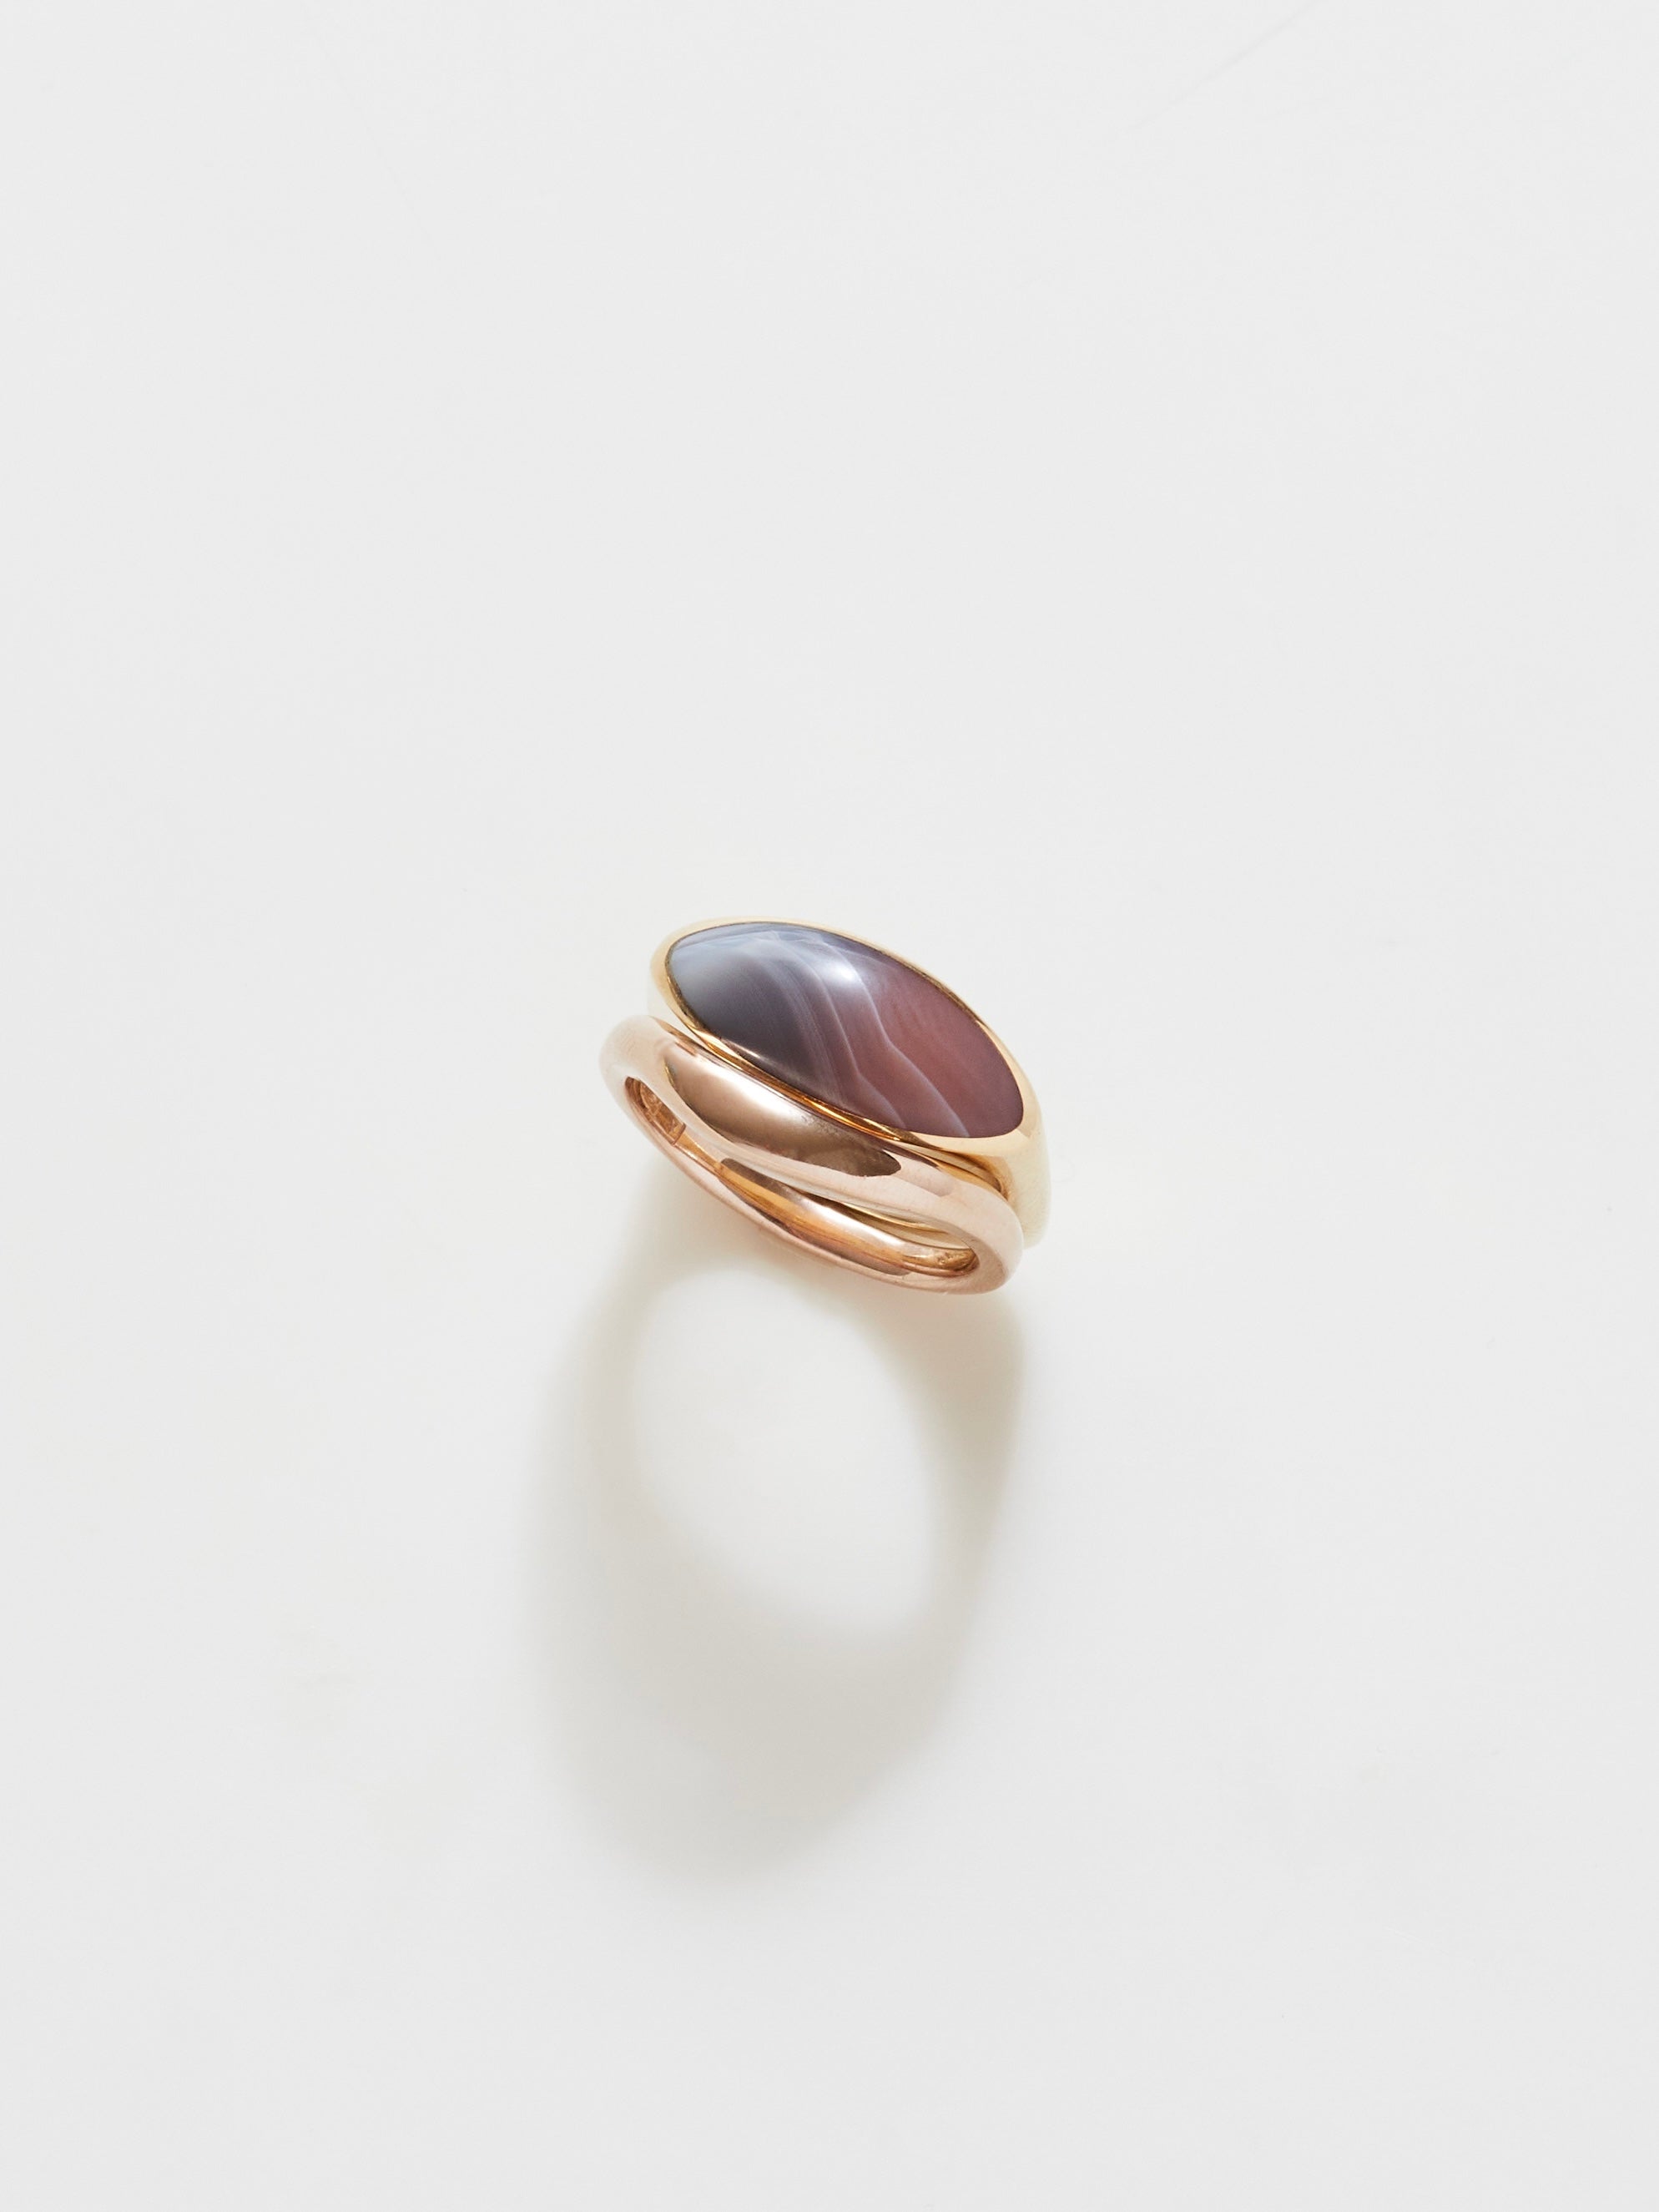 Pilar Ring in 10k Yellow and Botswana Agate, Size 6